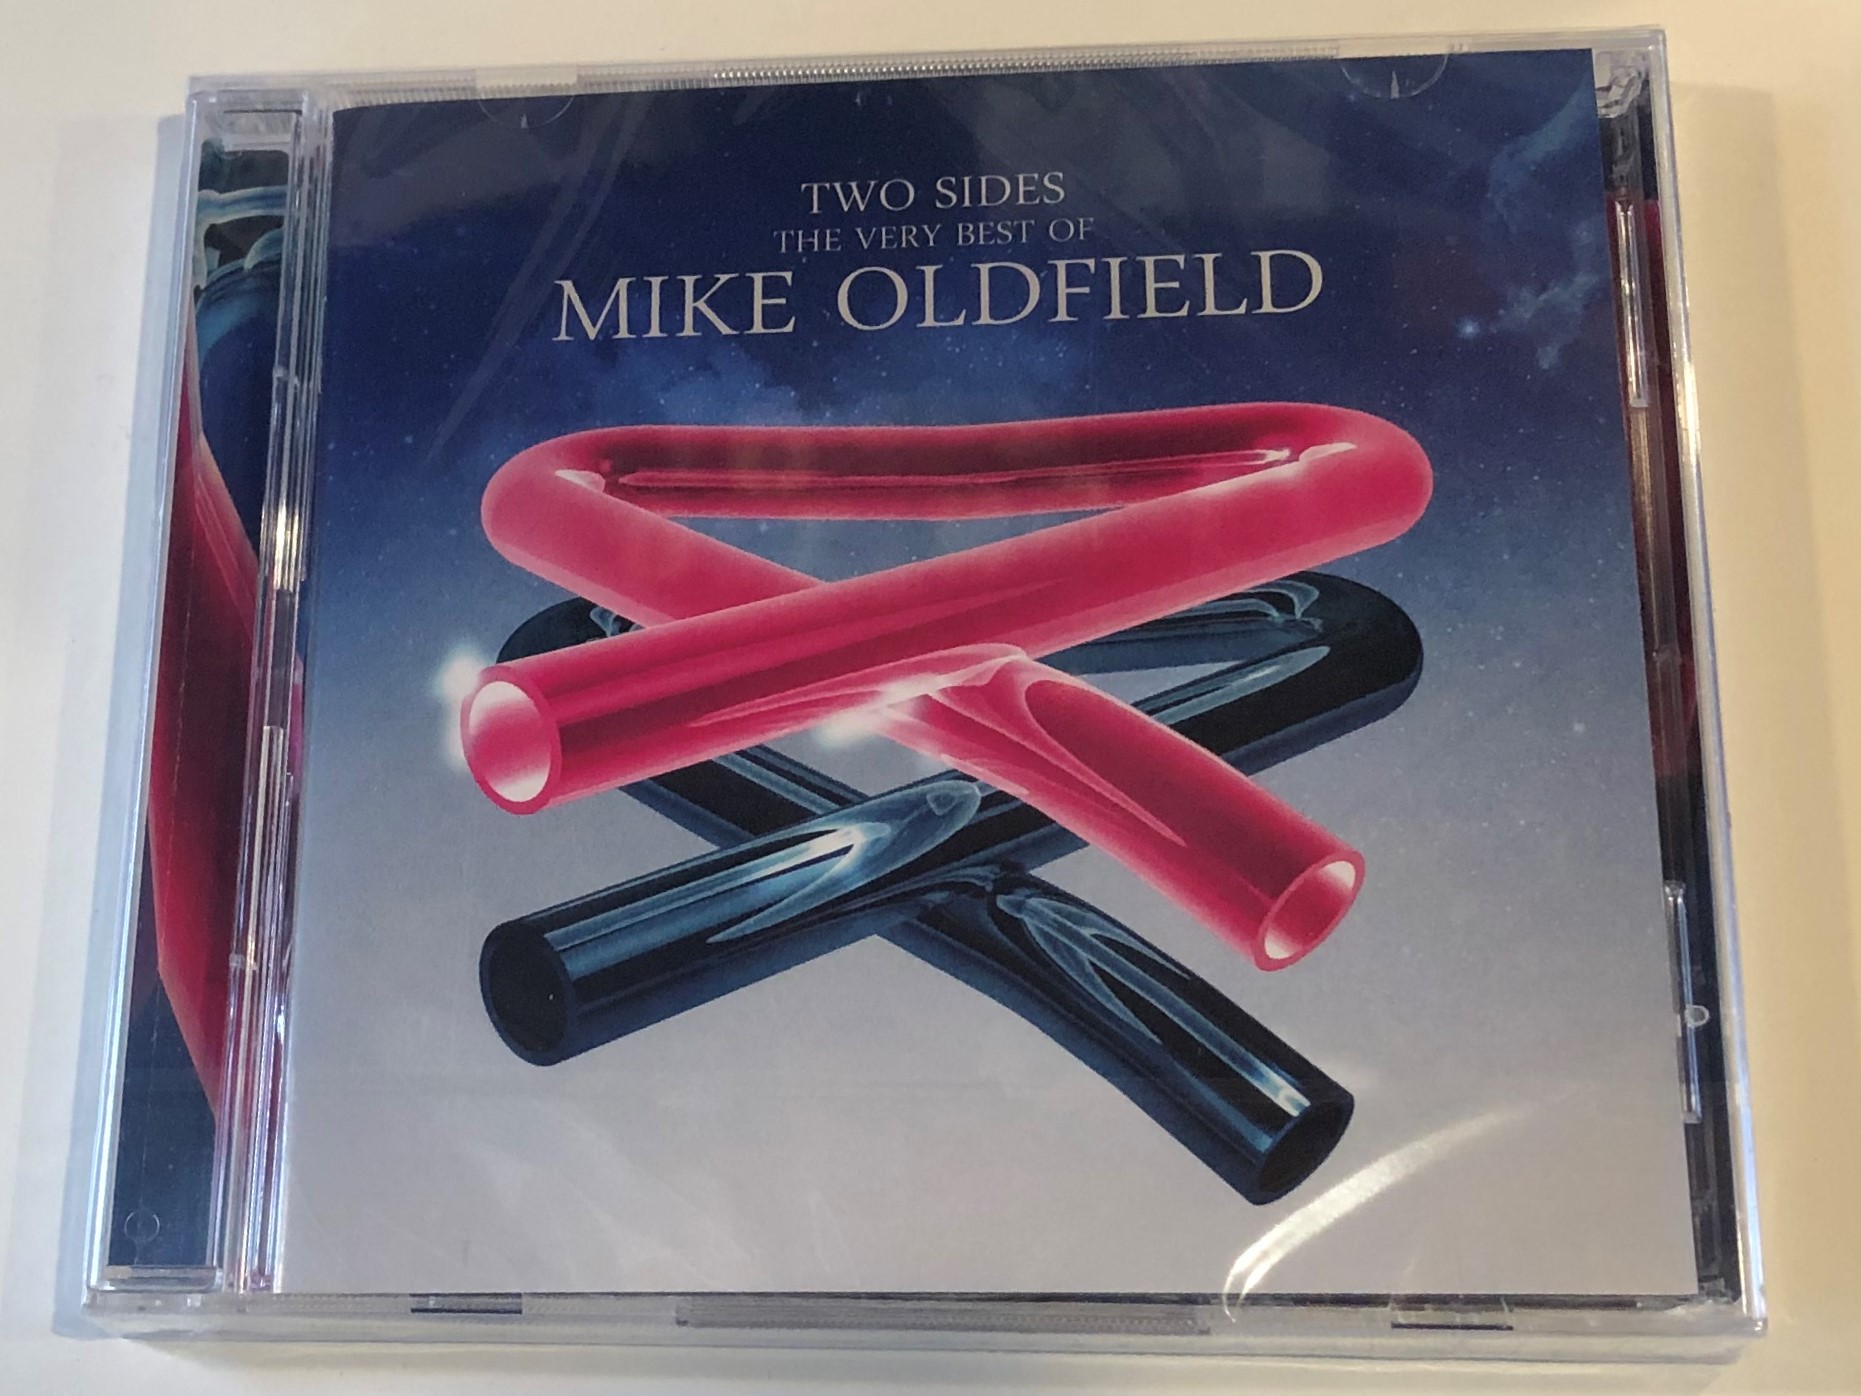 two-sides-the-very-best-of-mike-oldfield-mercury-2x-audio-cd-2012-5339182-1-.jpg